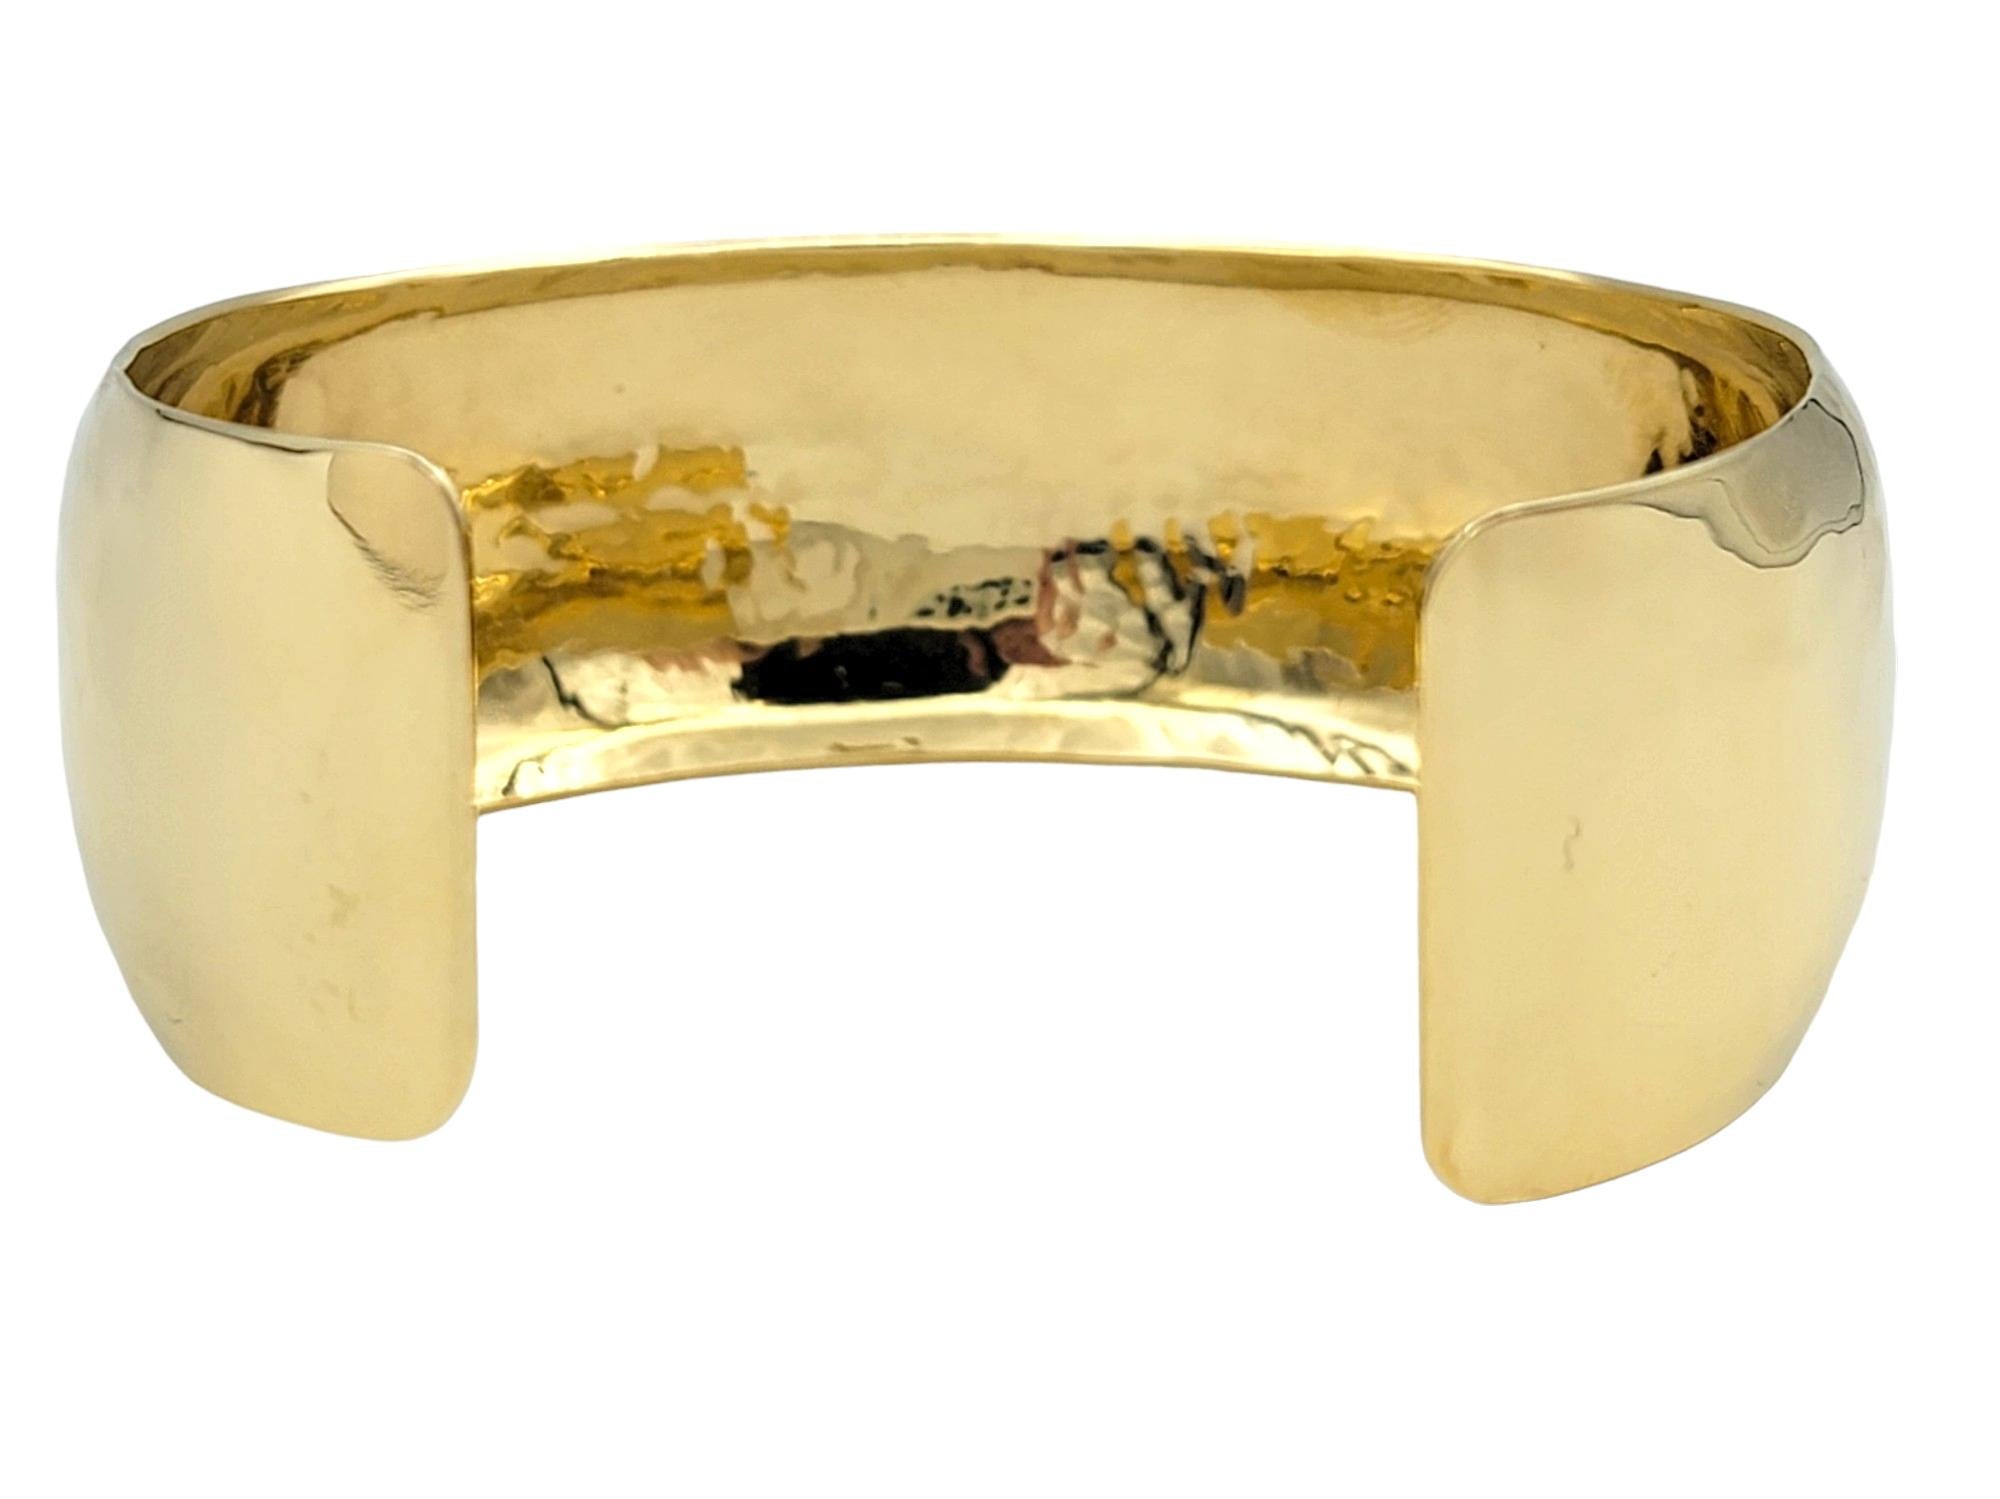 Contemporary John Atencio Hammered Finish Wide Cuff Bracelet Set in 18 Karat Yellow Gold For Sale